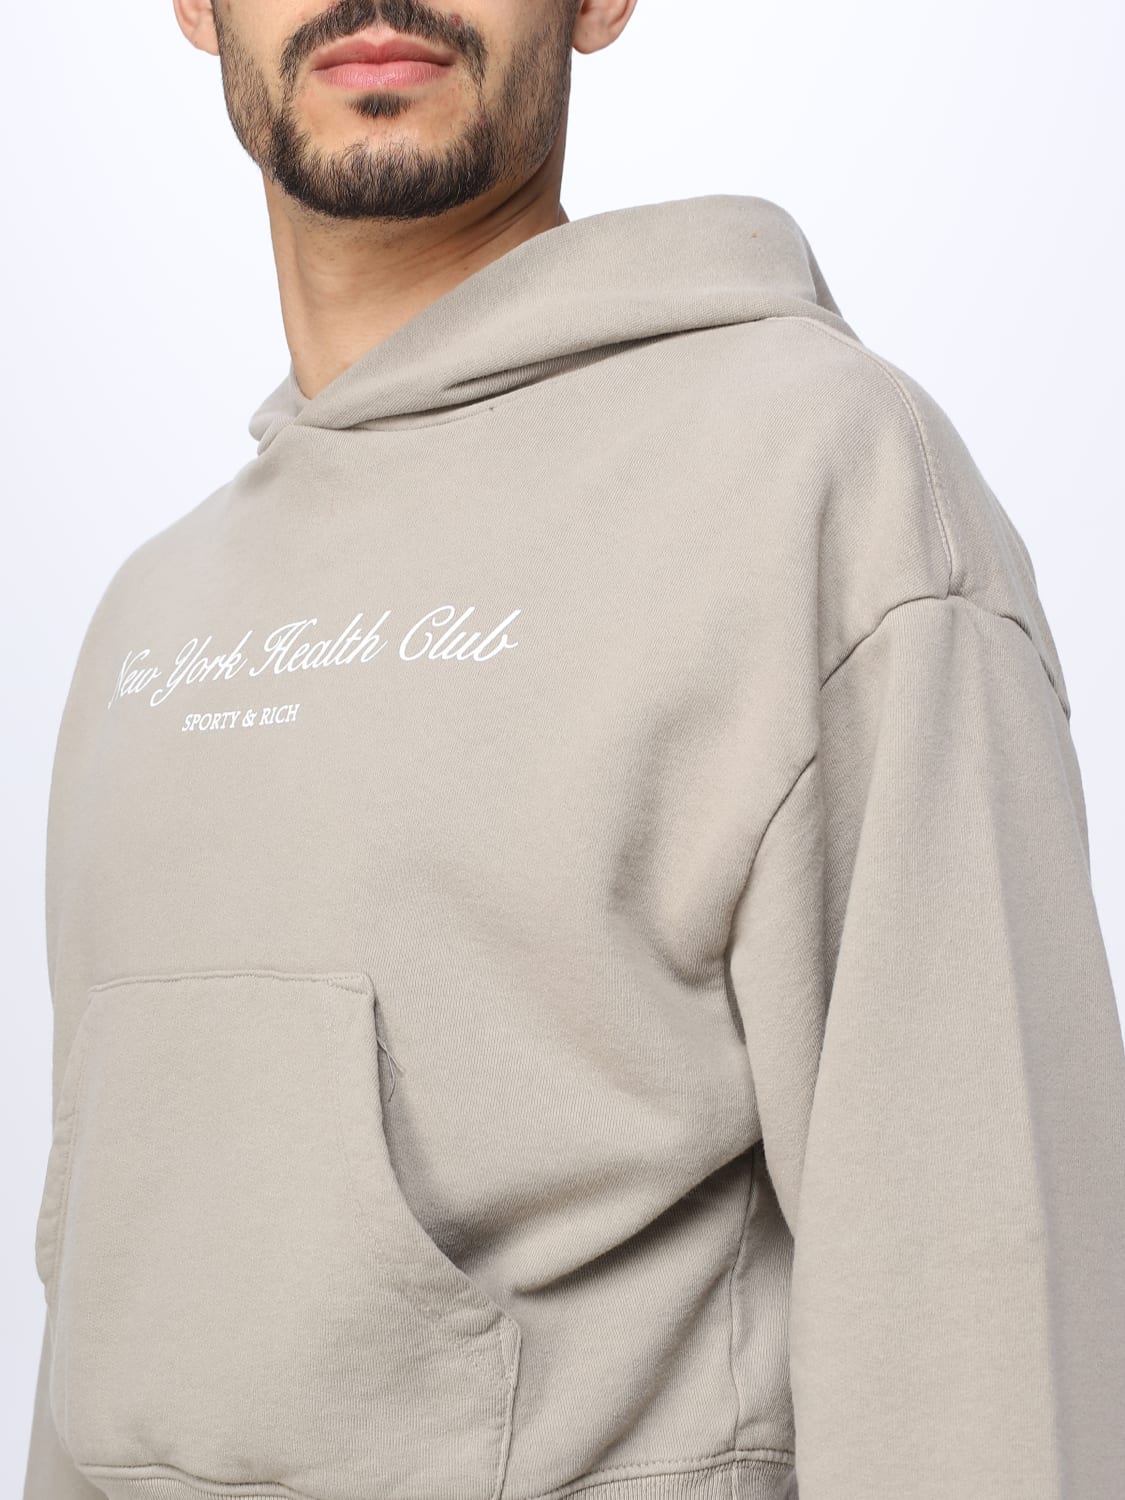 Sporty & Rich Outlet: sweatshirt for man   Grey   Sporty & Rich